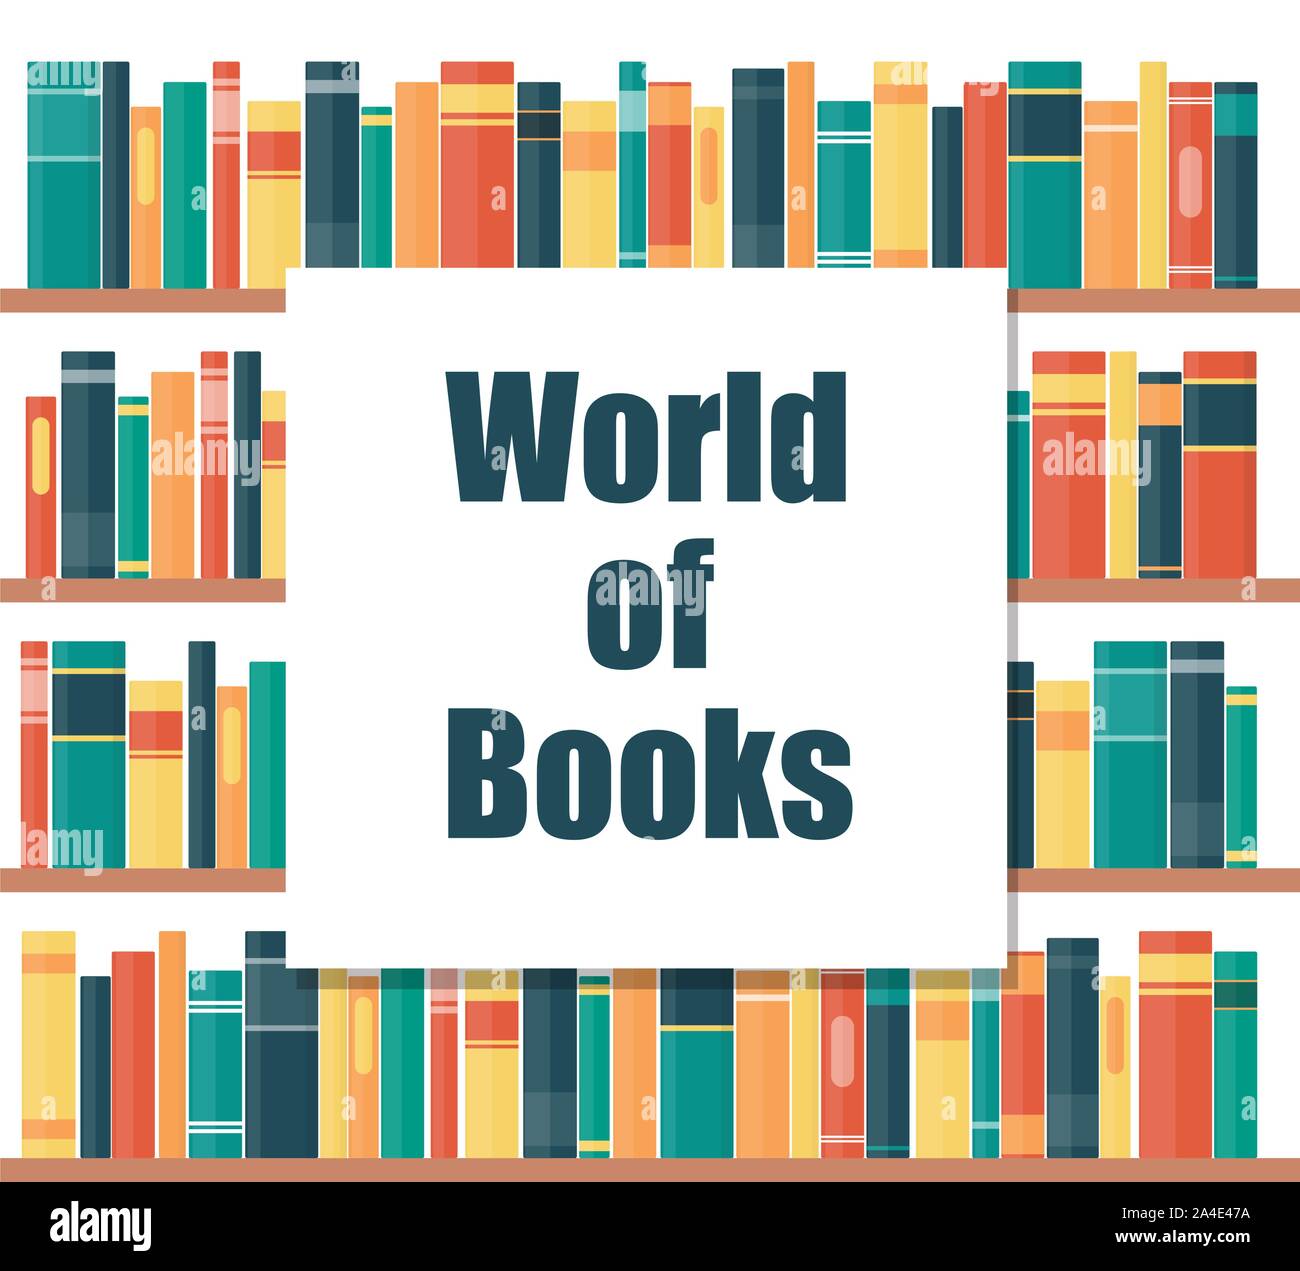 World of books concept. Book shelves with multicolored book spines. Books on a shelf. Vector illustration in flat style Stock Vector